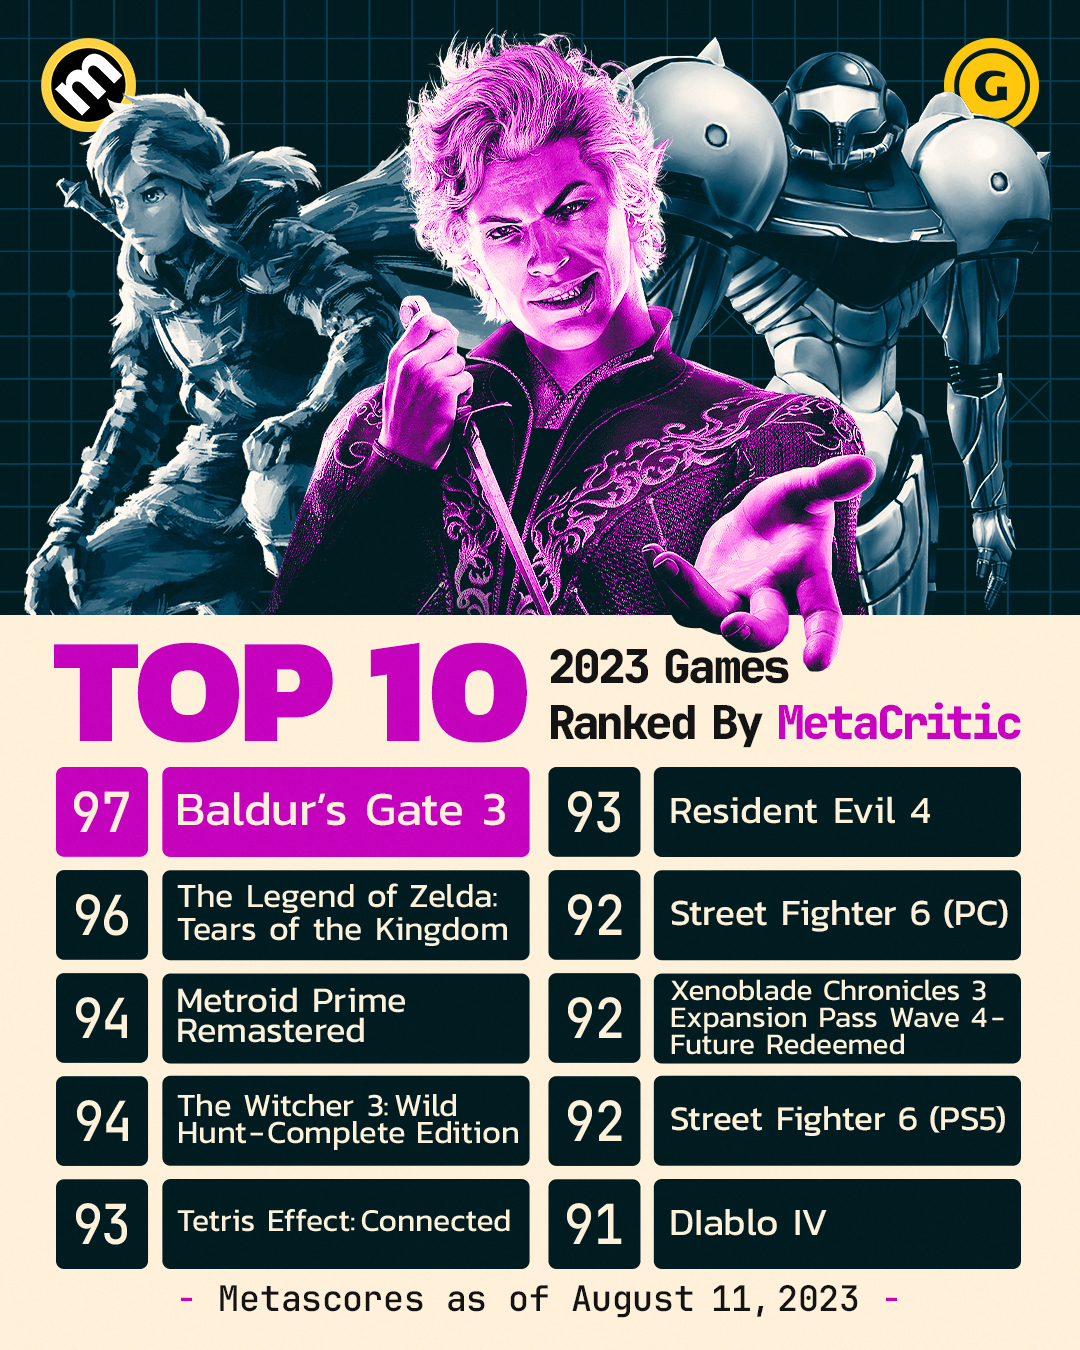 The highest-rated games of 2023, according to Metacritic